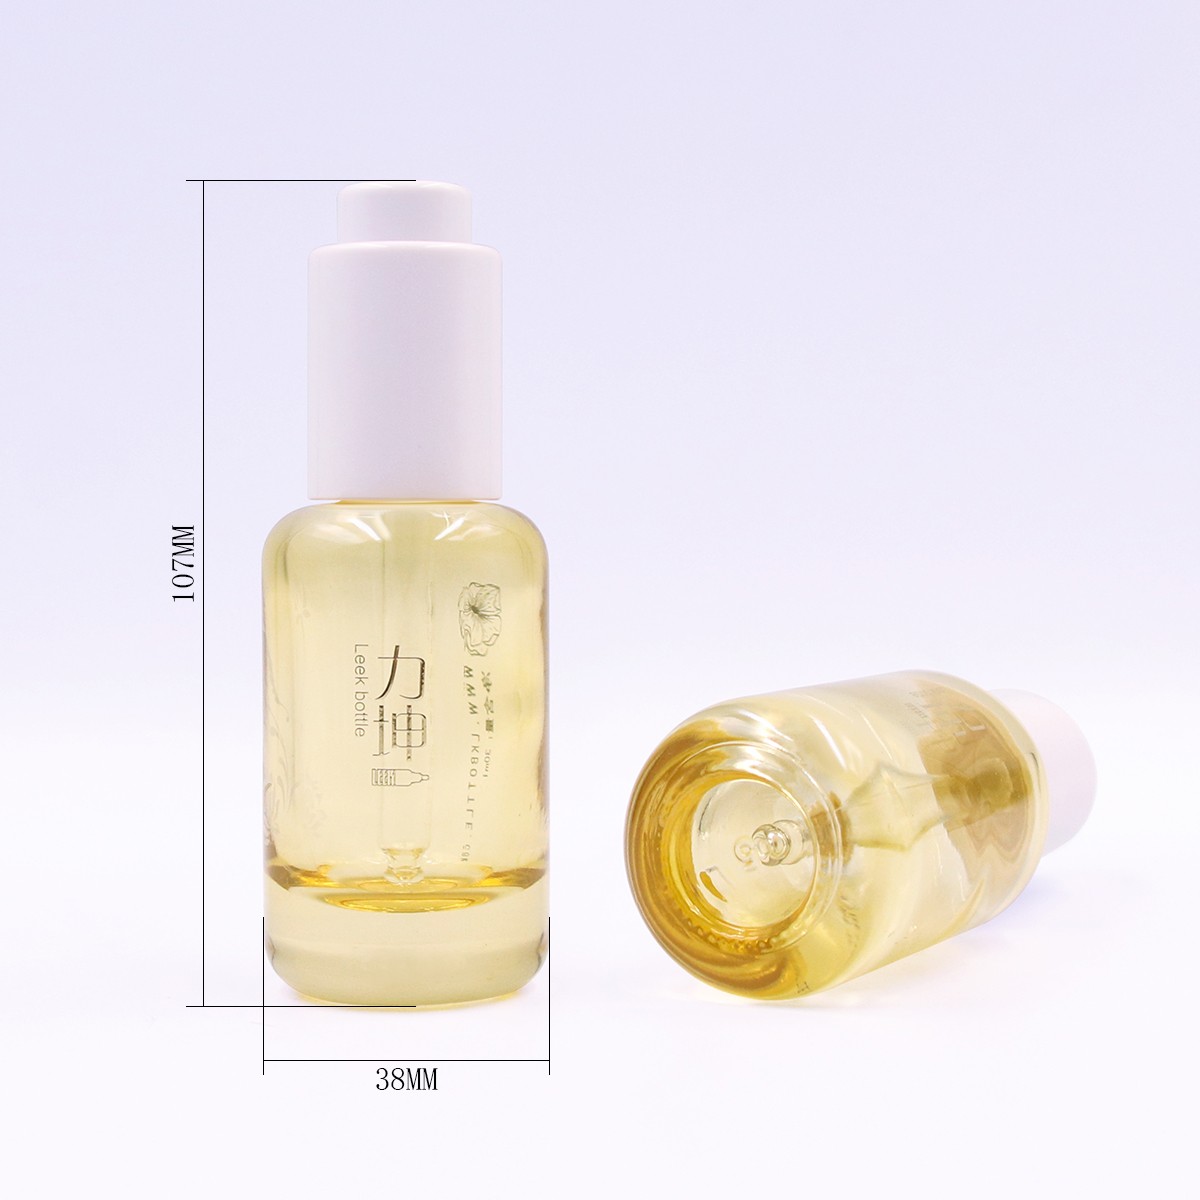 30ml Essence press-down glass bottle with smooth rounded shoulders